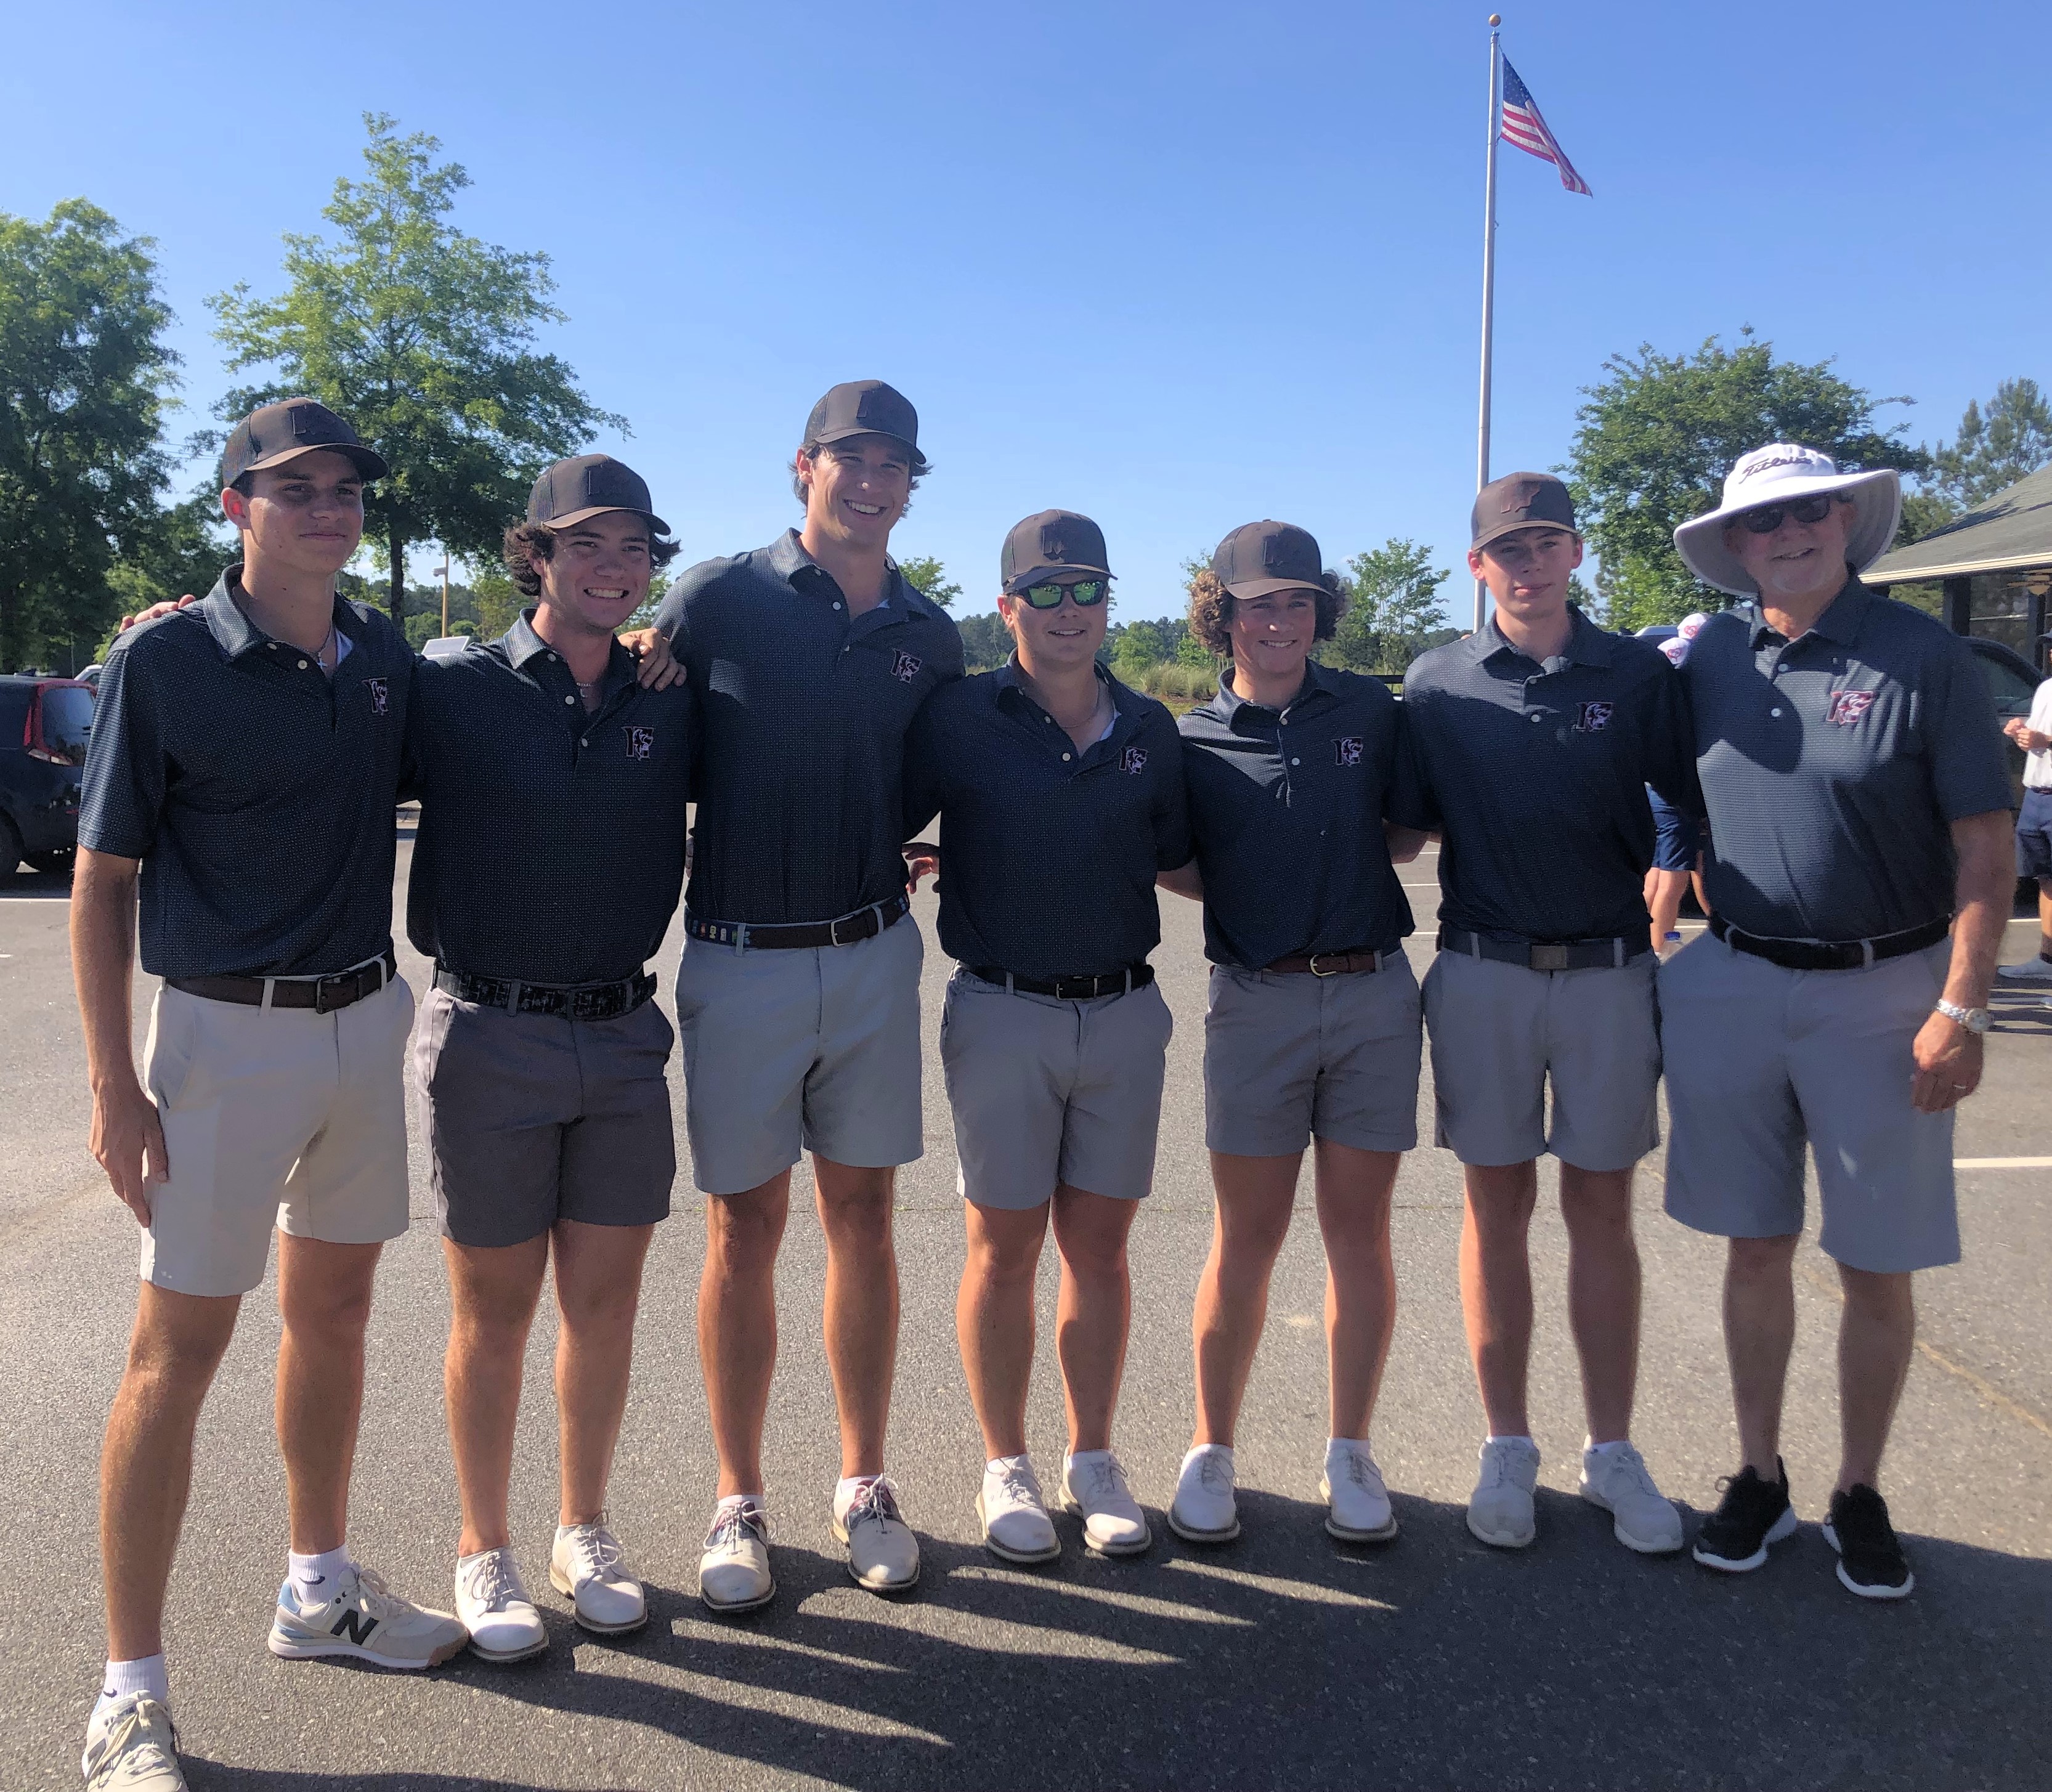 Nation Ford wins Region golf title; Jackets, Copperheads second (April 29 Roundup)